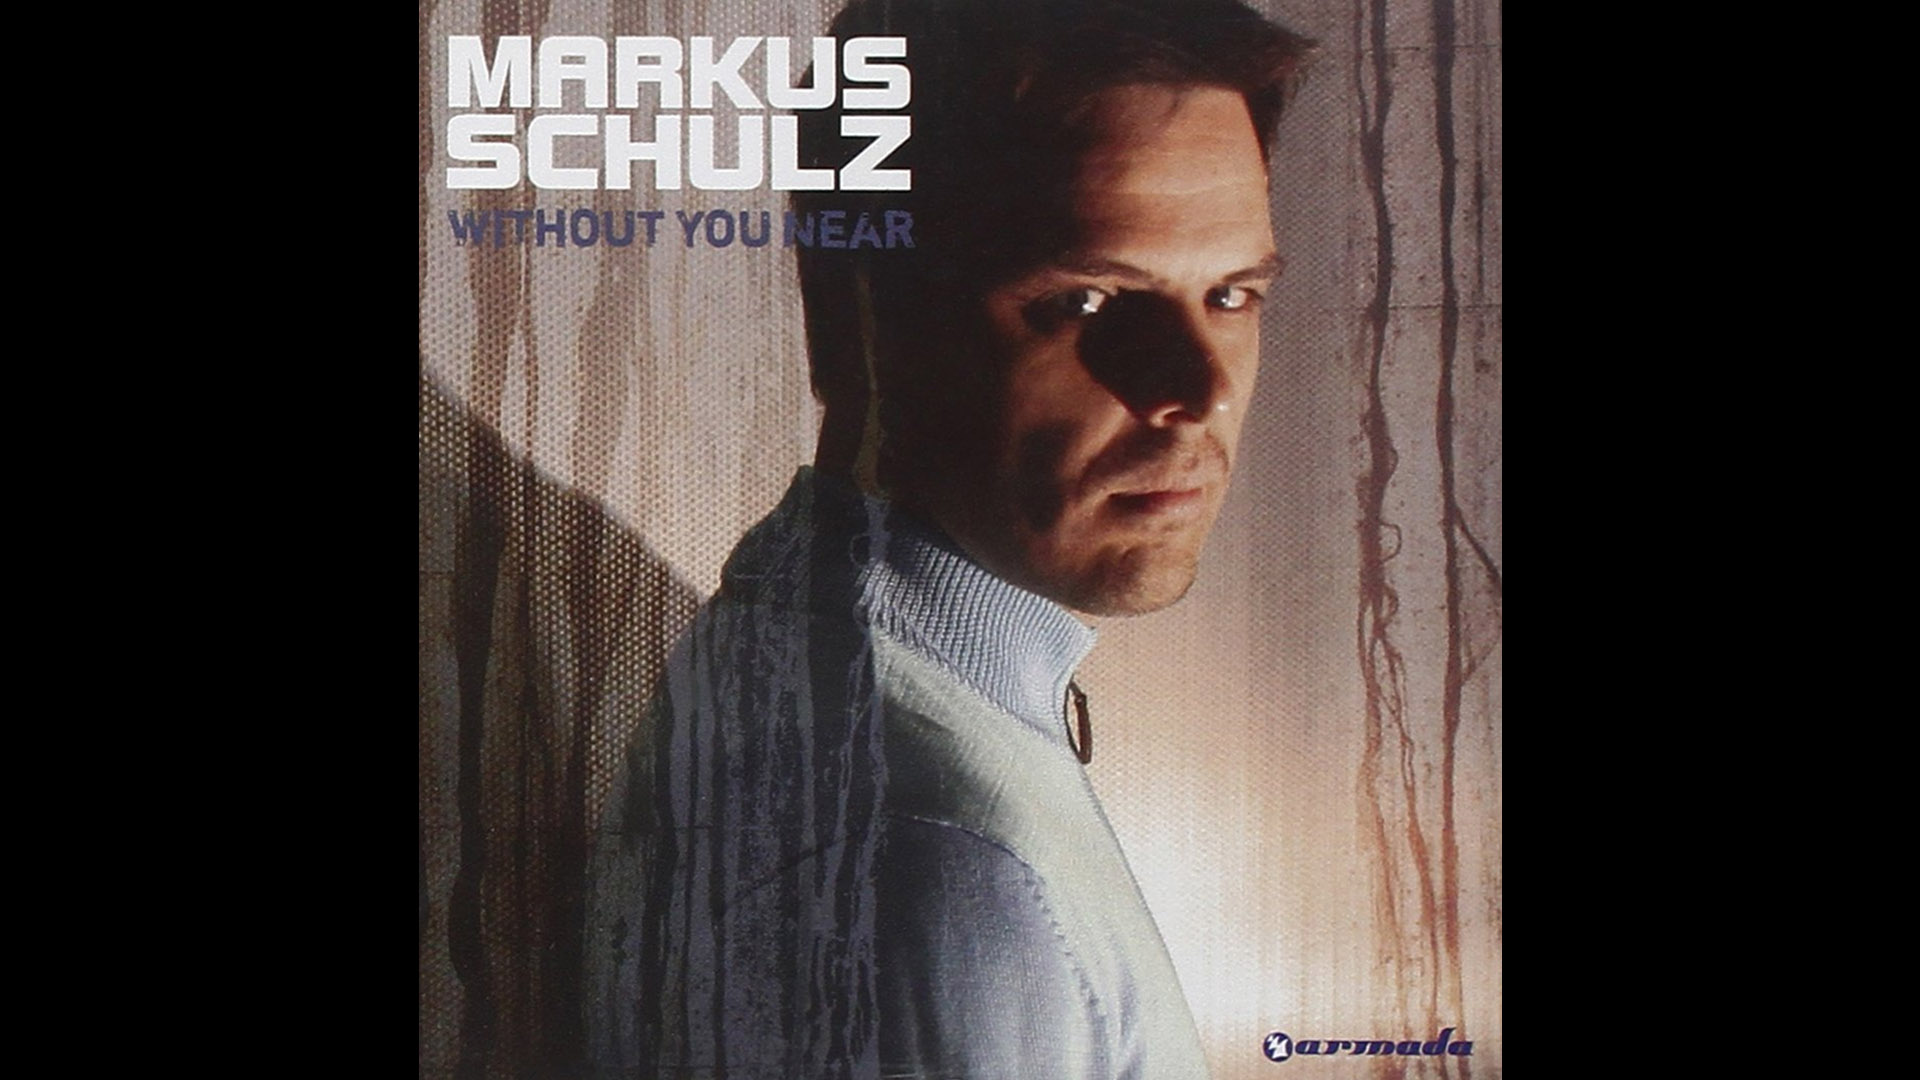 Without You Near Markus Schulz